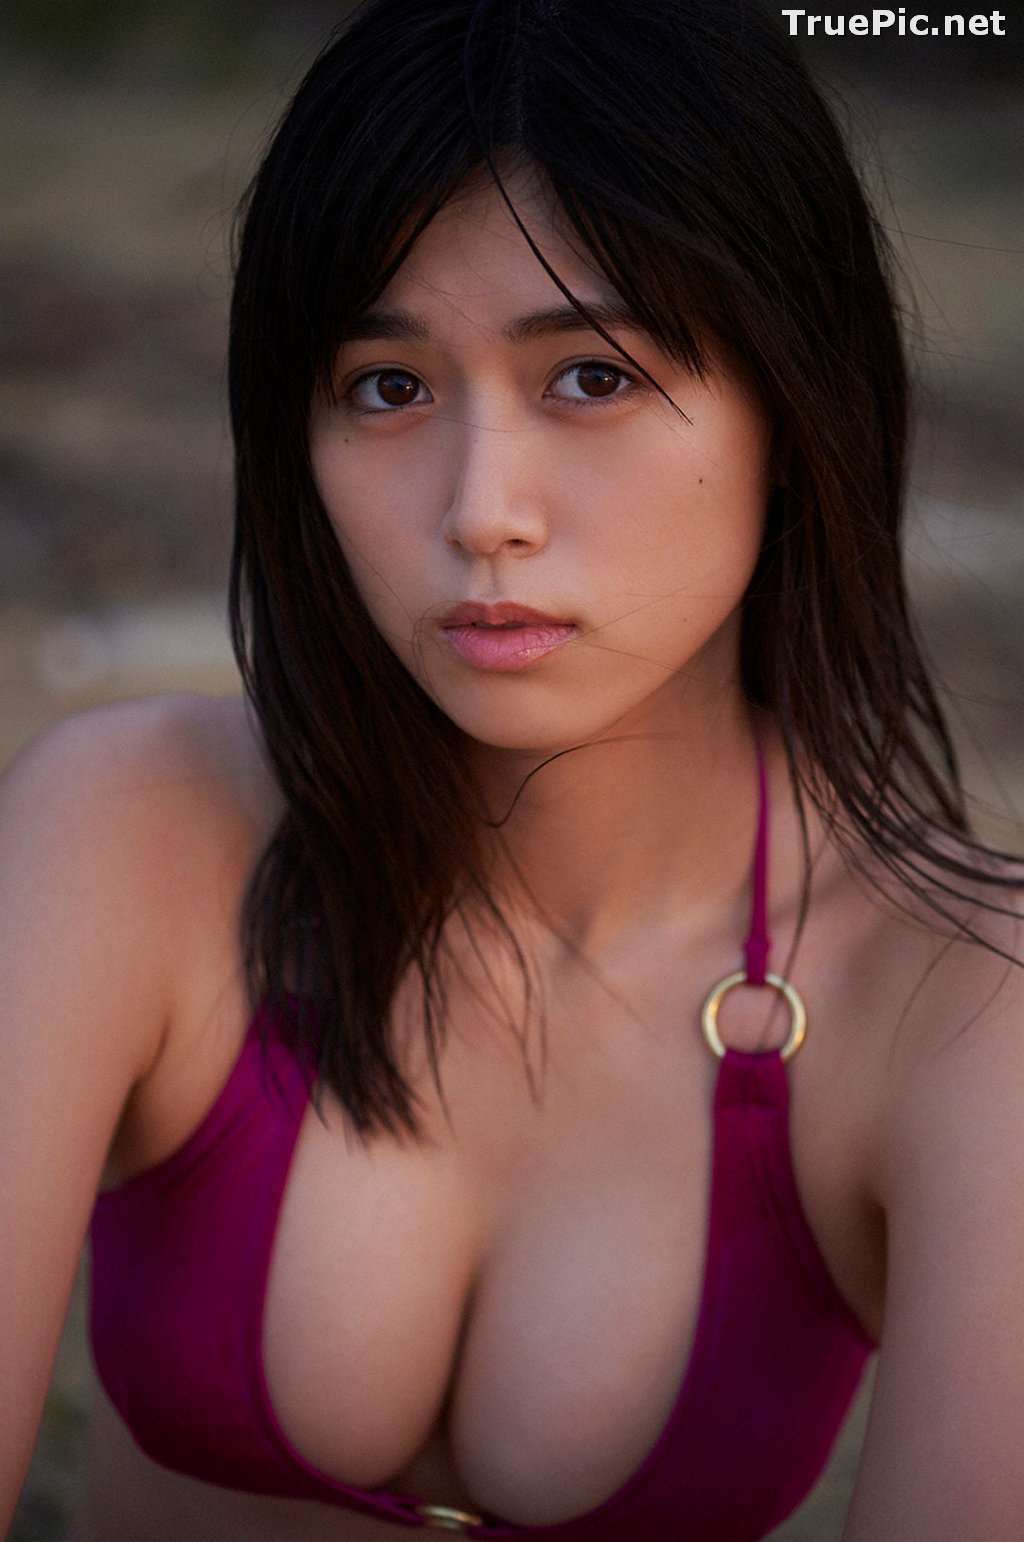 ImageJapanese Gravure Idol and Actress - Kitamuki Miyu (北向珠夕) - Sexy Picture Collection 2020 - TruePic.net - Picture-134